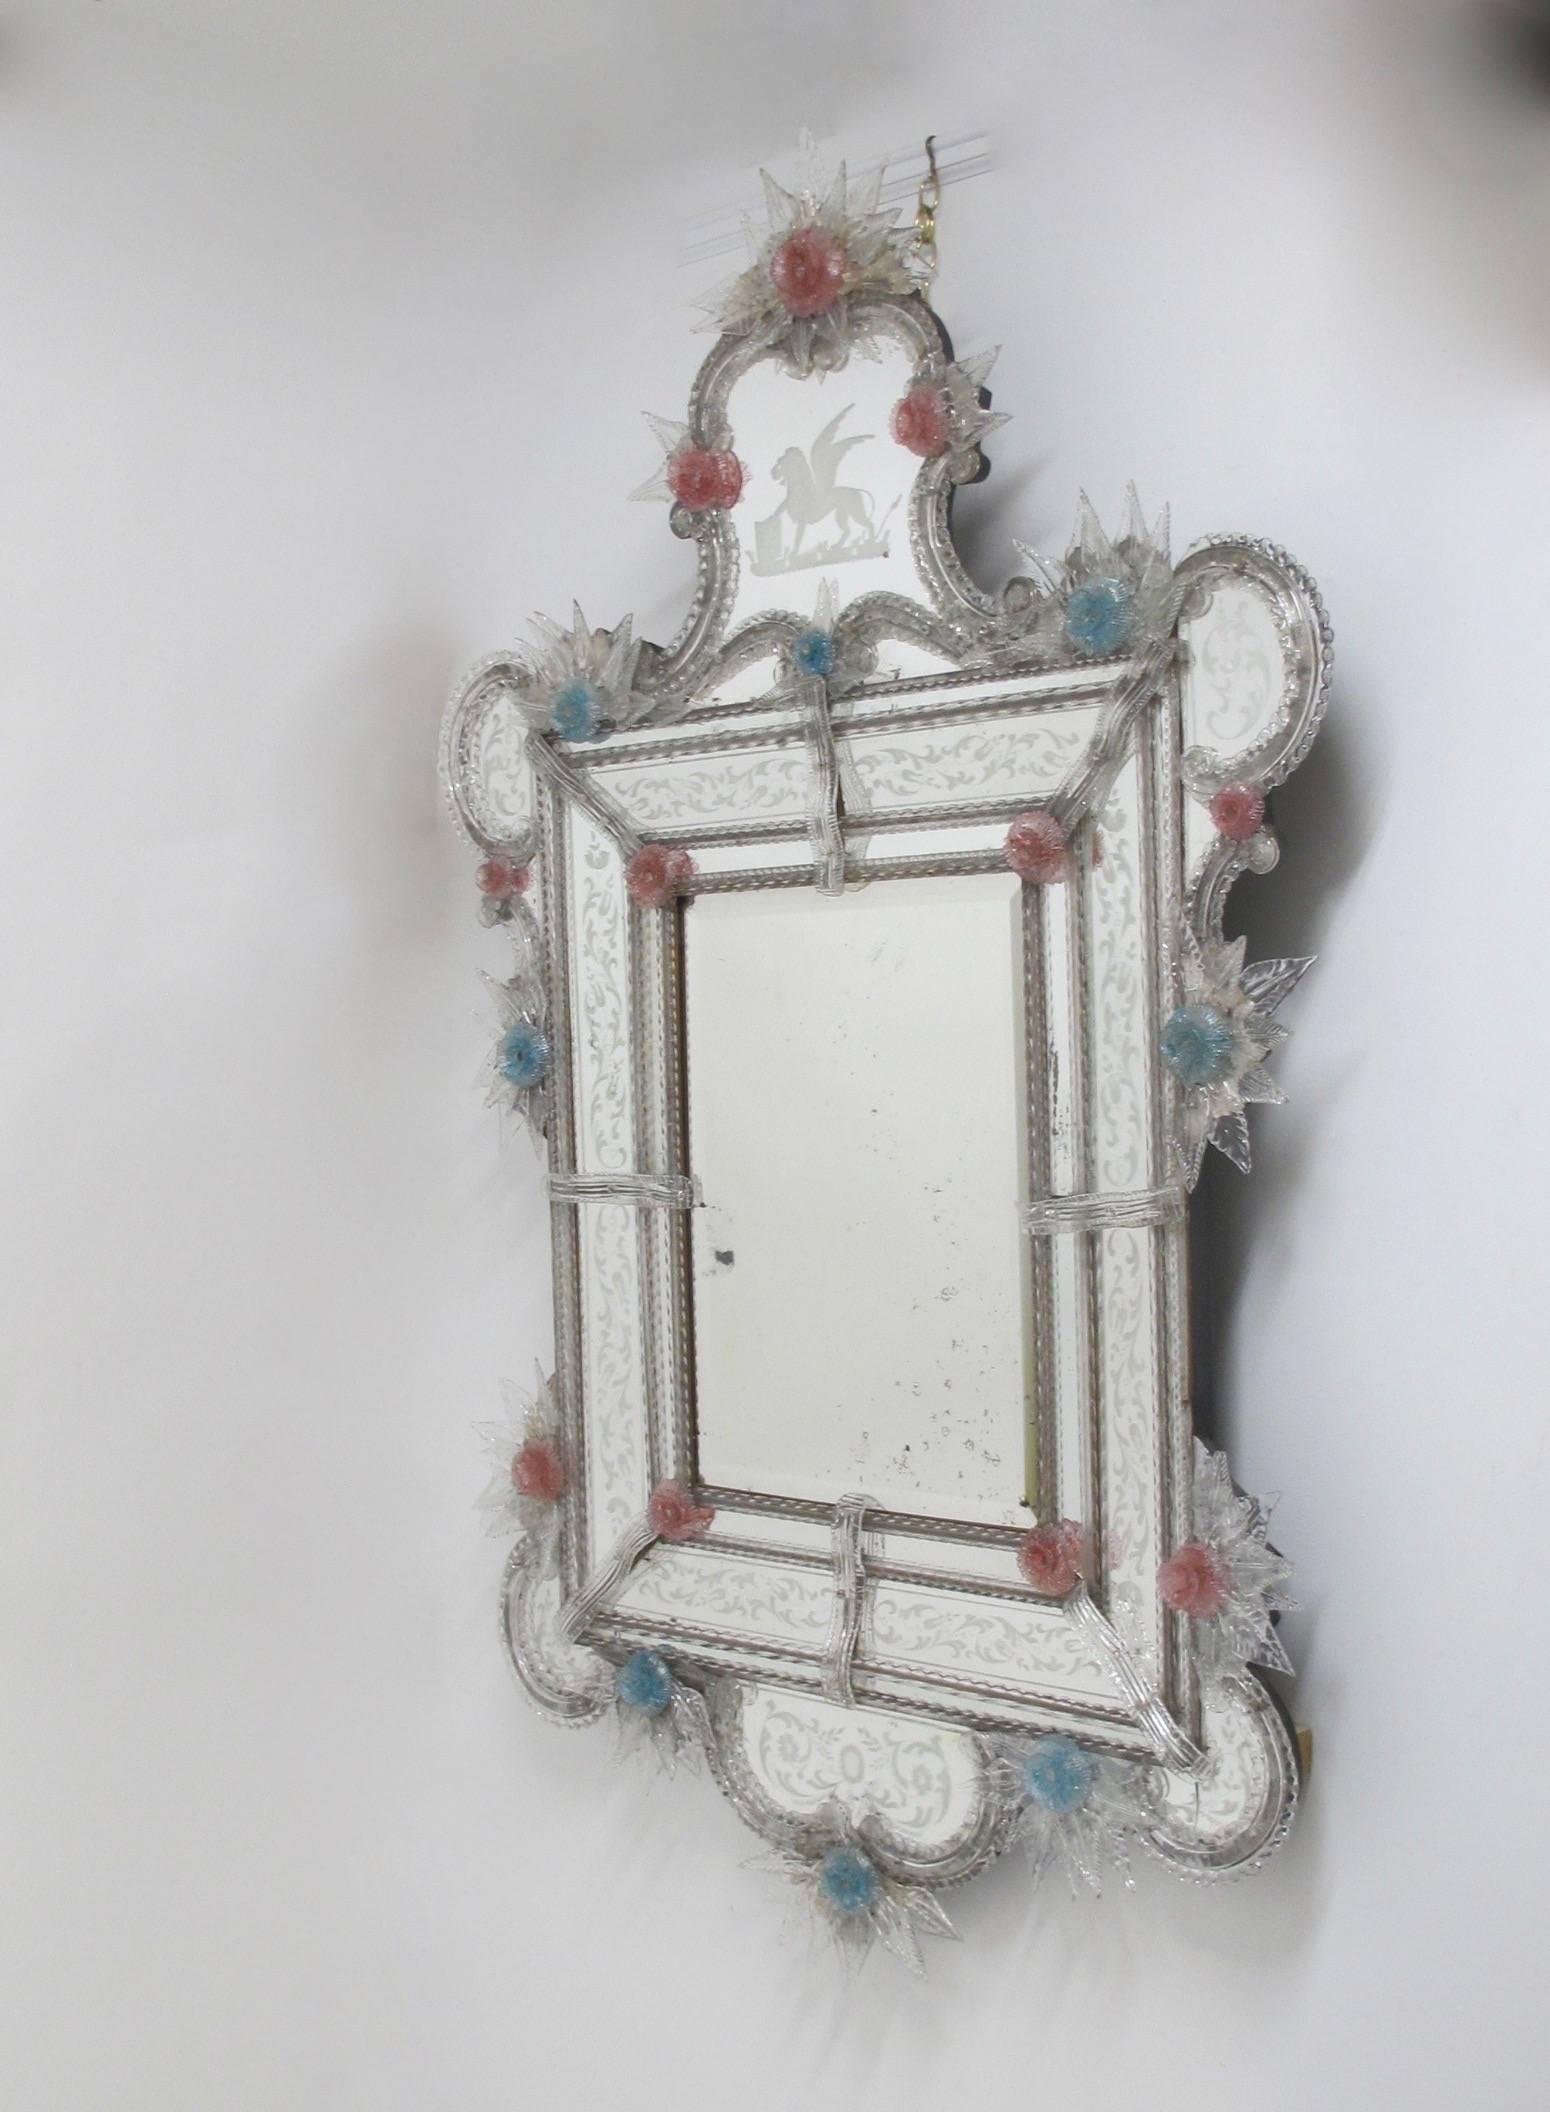 Wonderfully exuberant and fanciful large Venetian mirror with etched mirror panels and delicate pink and blue rosettes with clear leaves. There are some minor chips on the rosettes, the right bottom corner lobe has a crack in the glass. Italy, 19th